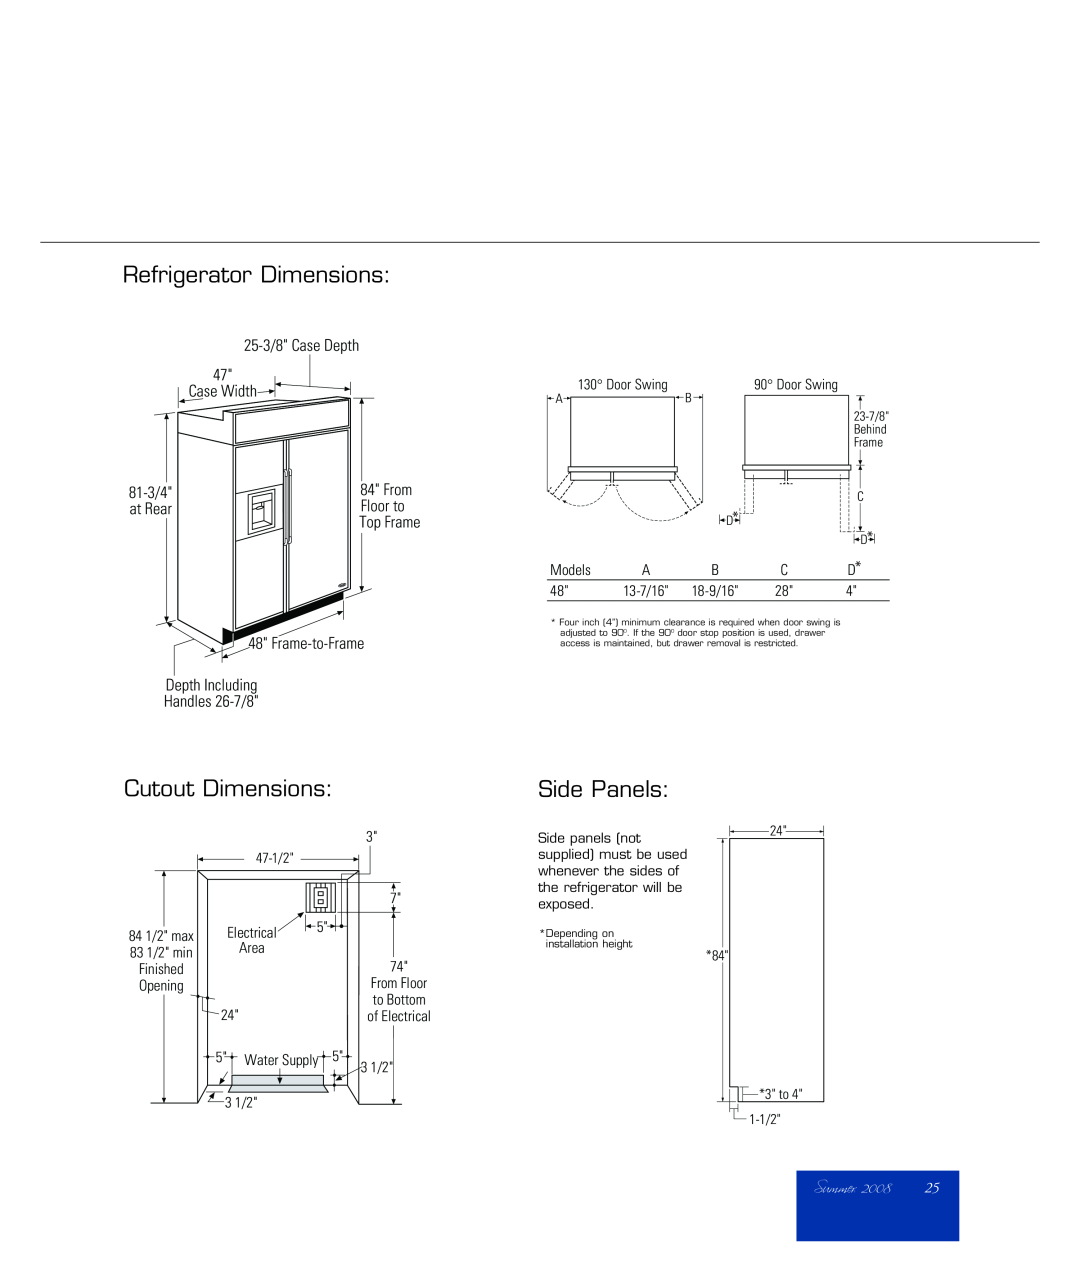 DCS RF48SS Summer, Refrigerator Dimensions, Cutout Dimensions, Side Panels, 25-3/8 Case Depth, Case Width, 81-3/4, at Rear 